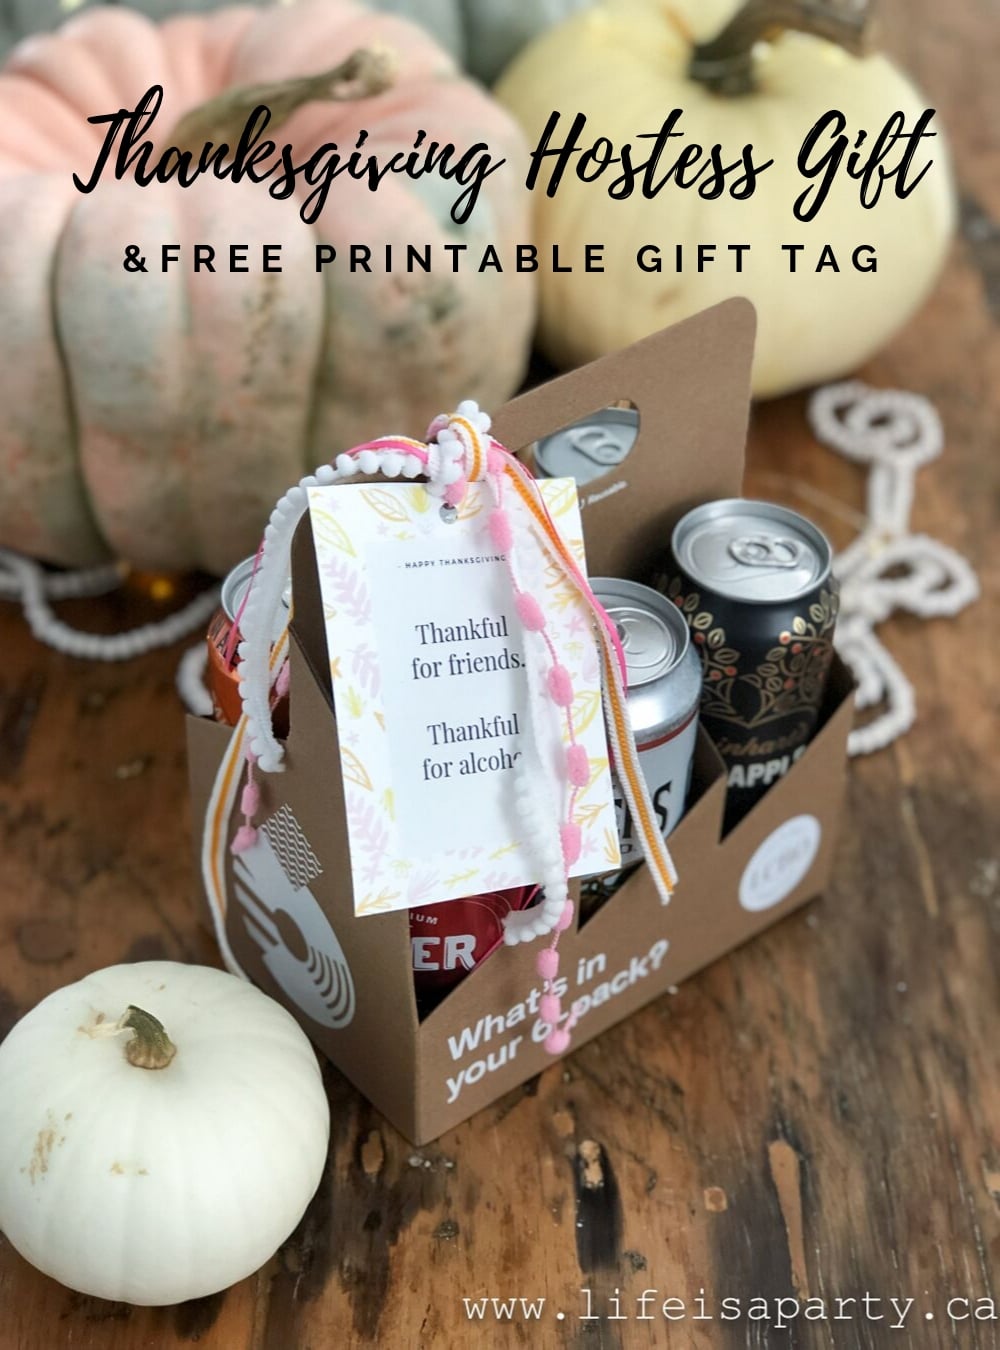 Thanksgiving Hostess Gift with Free Printable Gift Tag